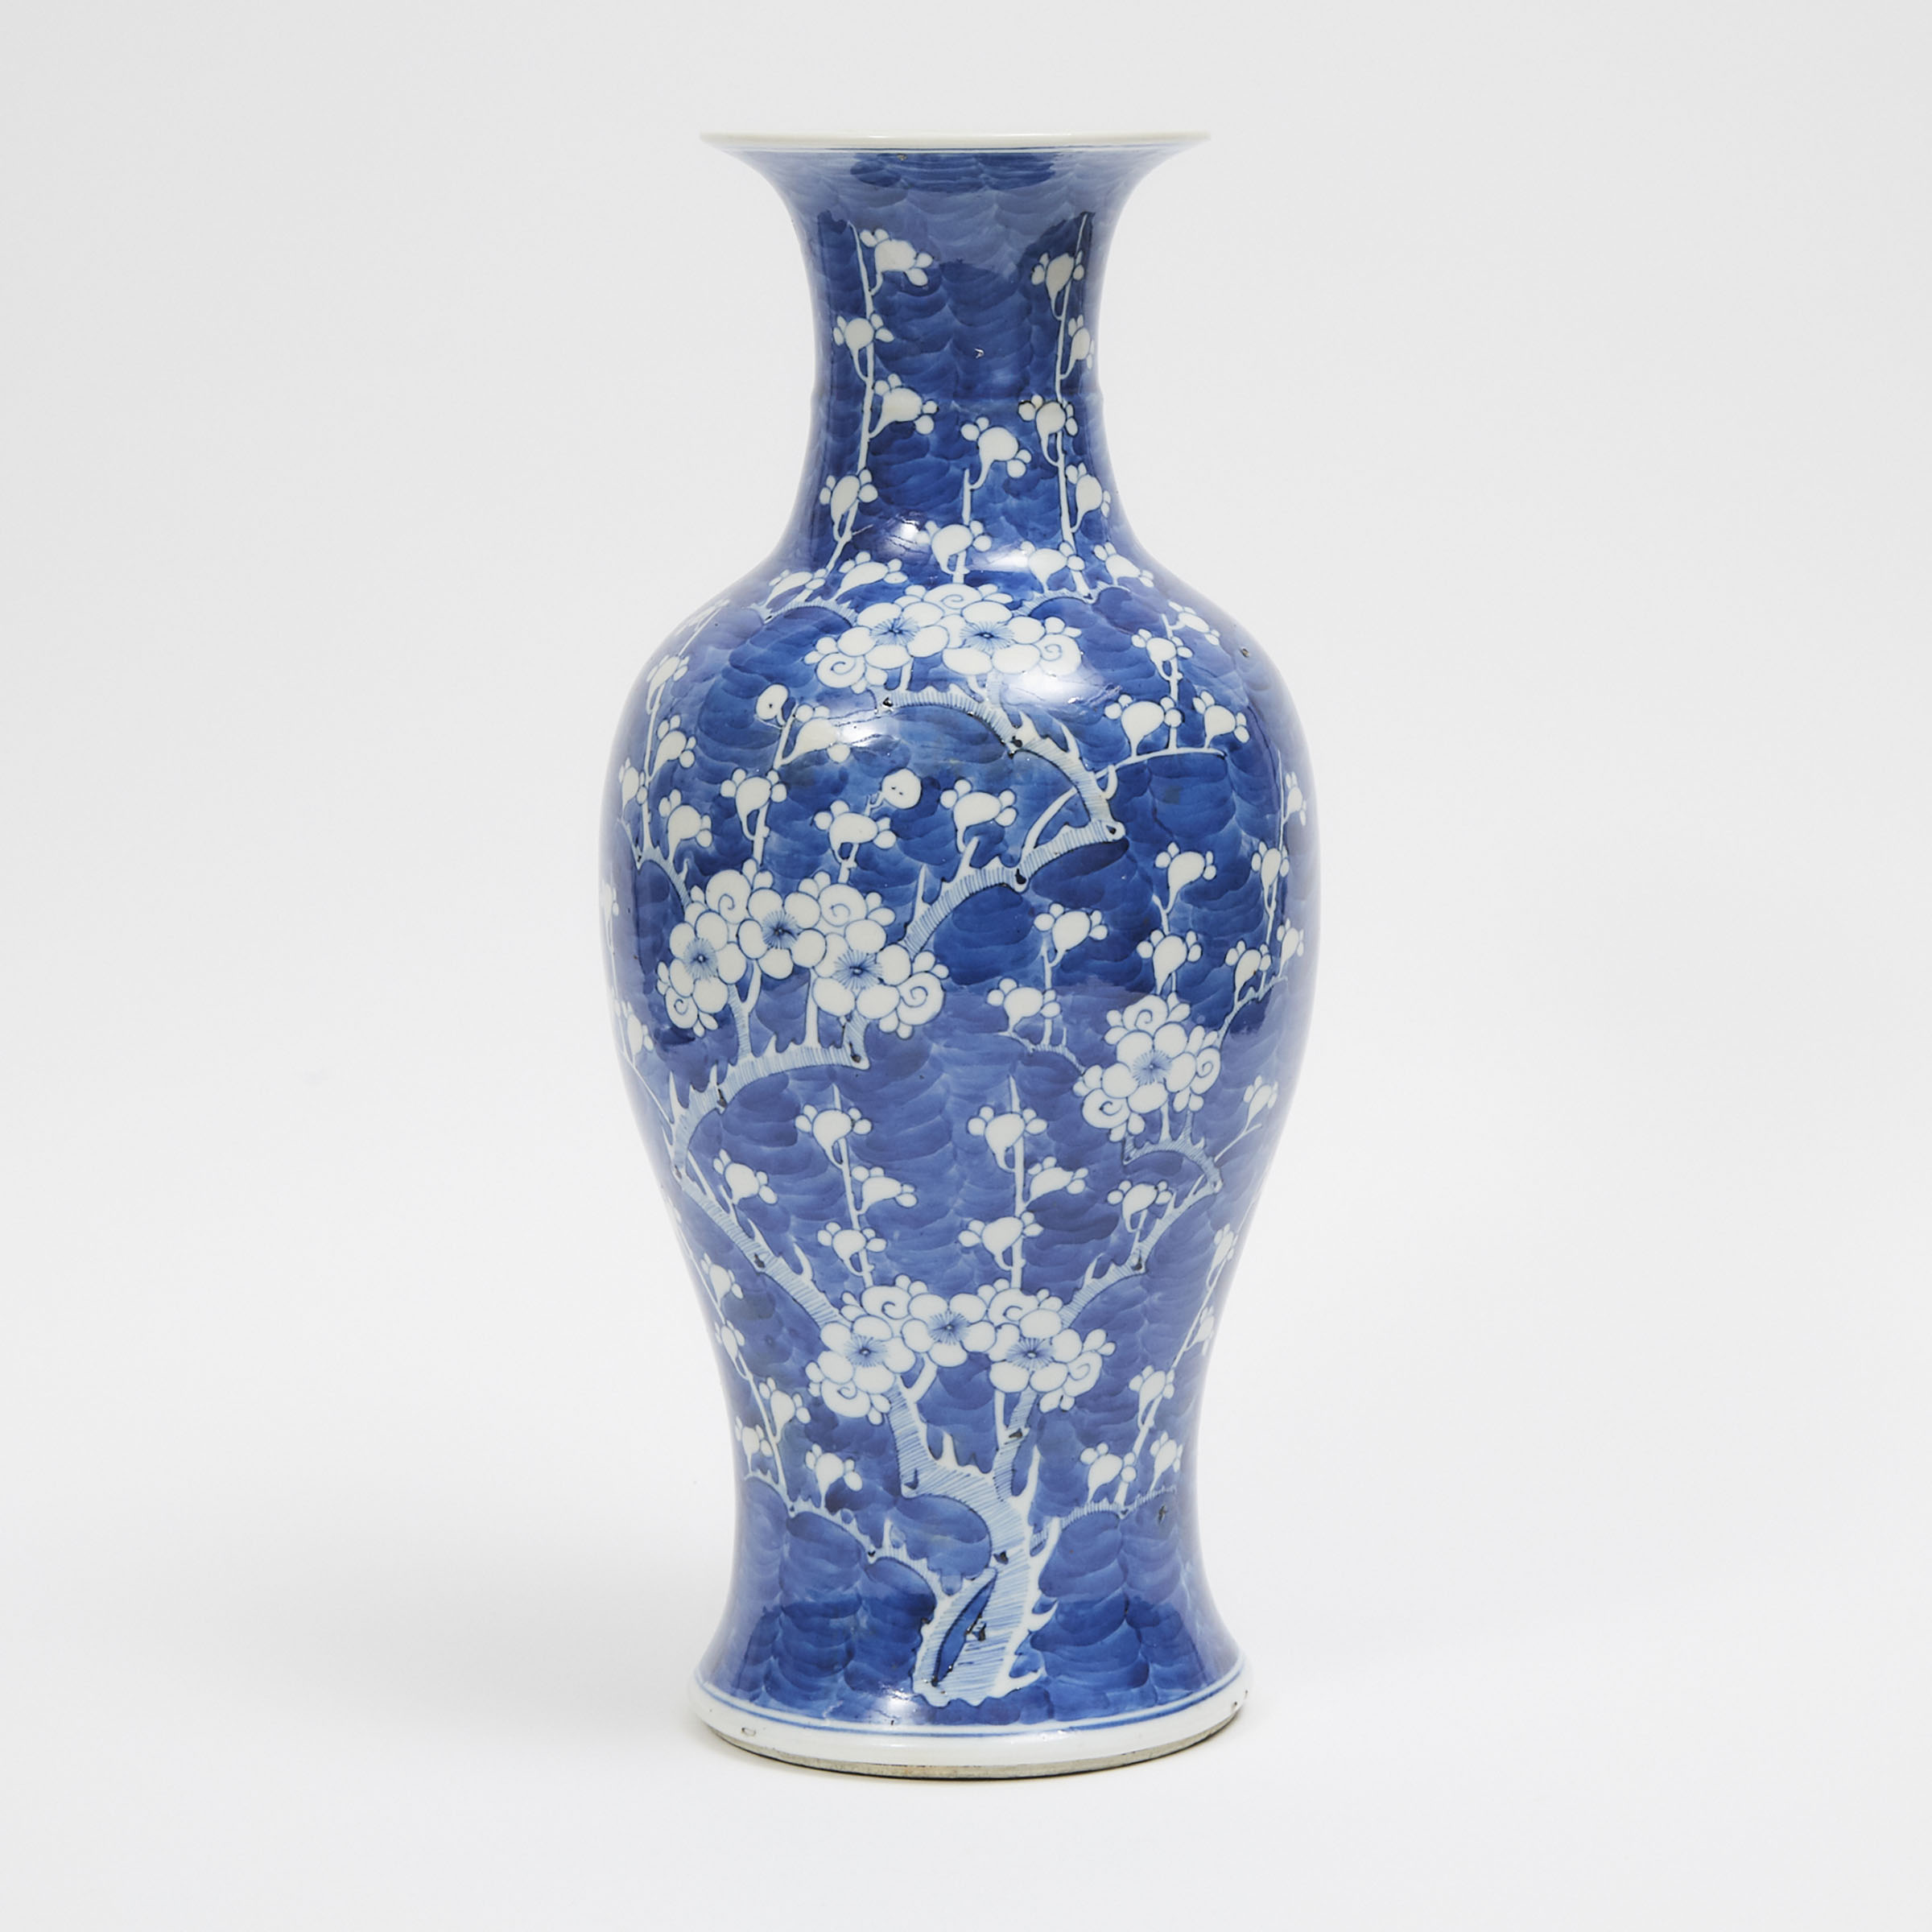 A Blue and White Porcelain 'Prunus' Vase, Qing Dynasty